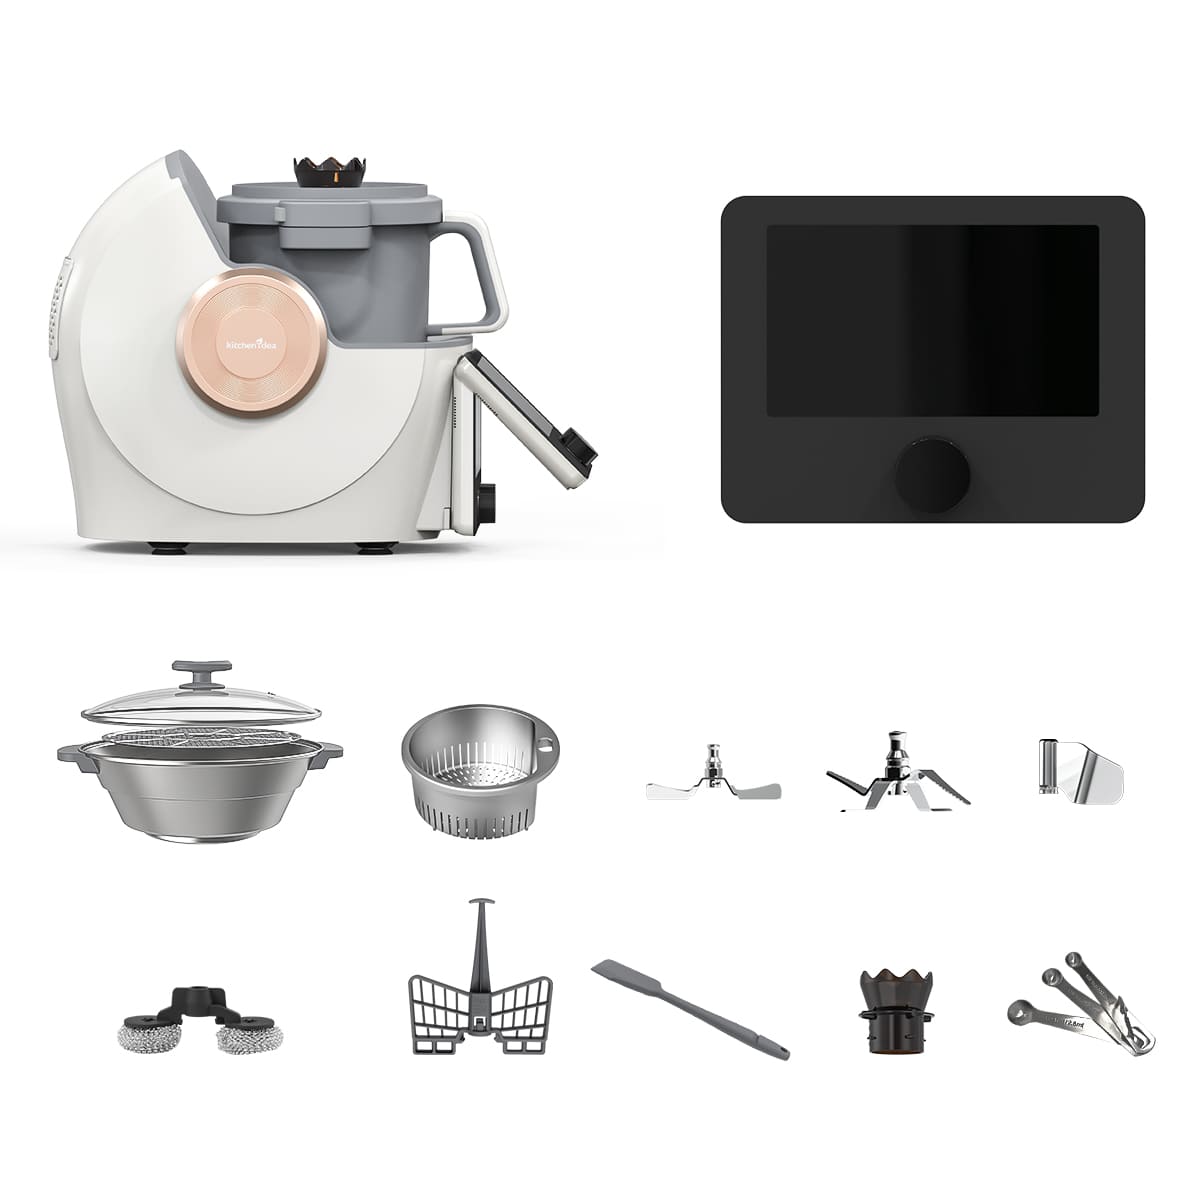 KODY 29 personal cooking robot and sous chef - Geeky Gadgets